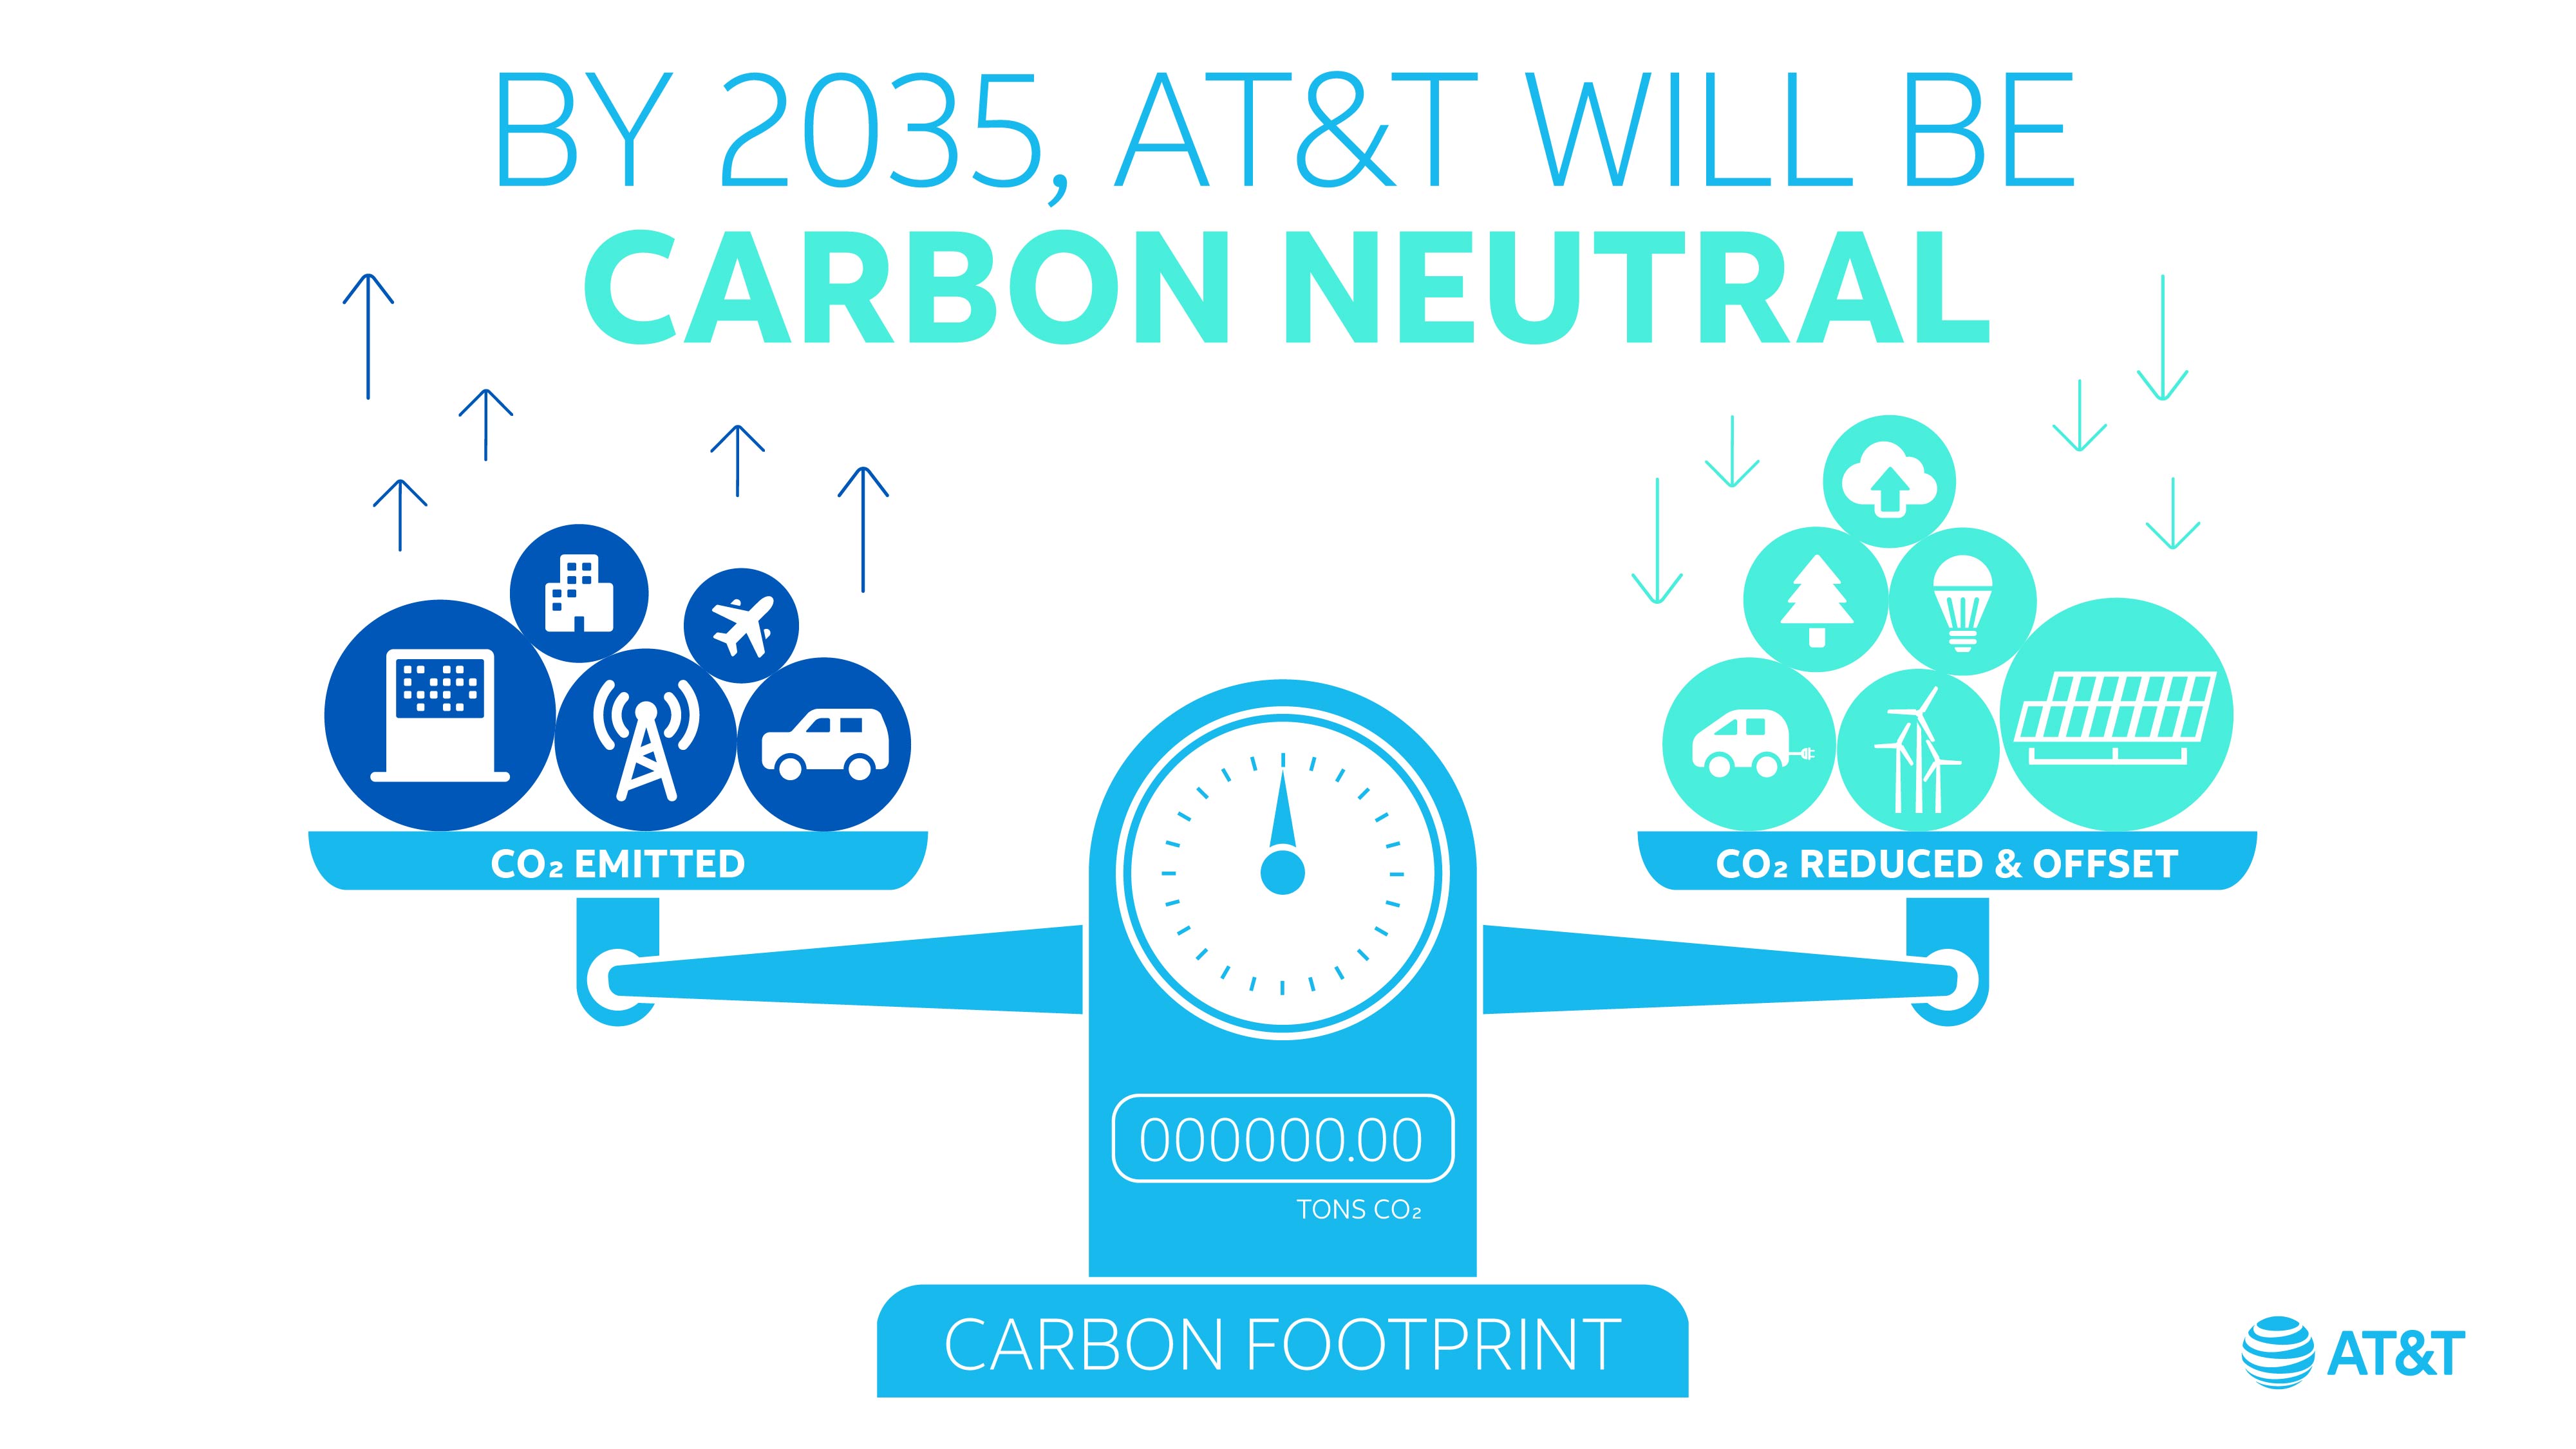 AT&T Commits to be Carbon Neutral by 2035